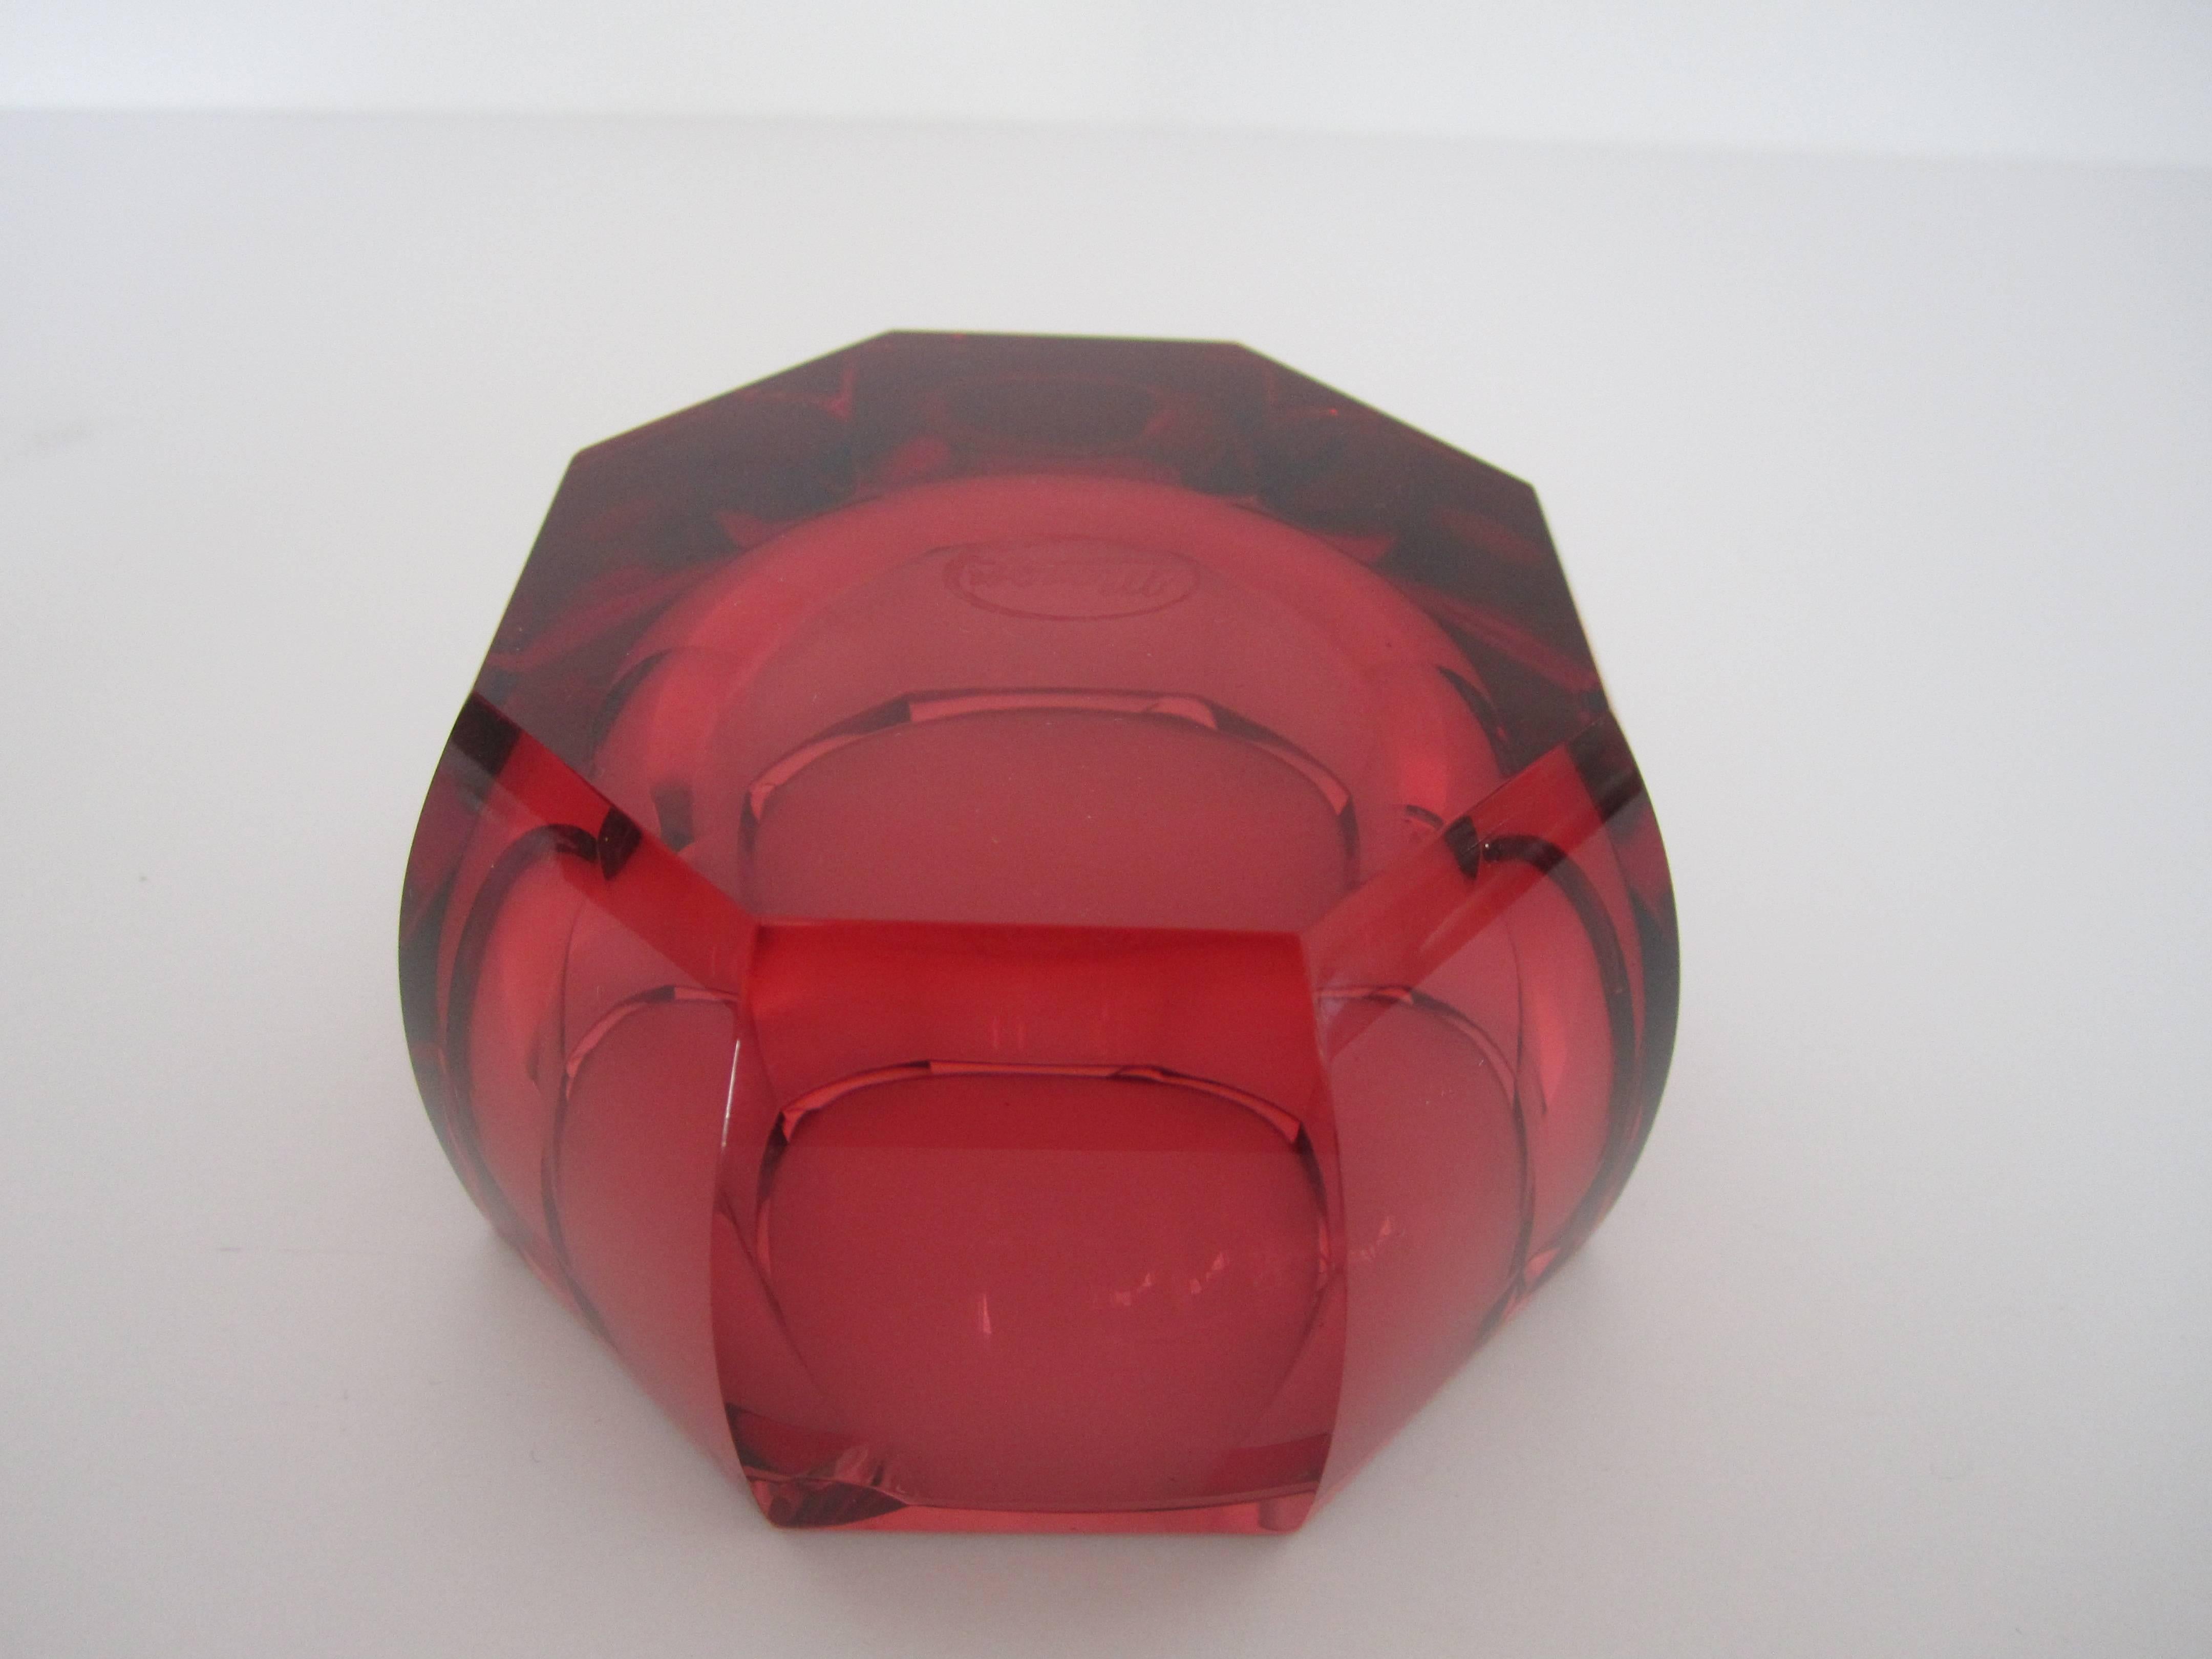 Gorgeous Red Octagonal Crystal Bowl or Ashtray by Moser 1